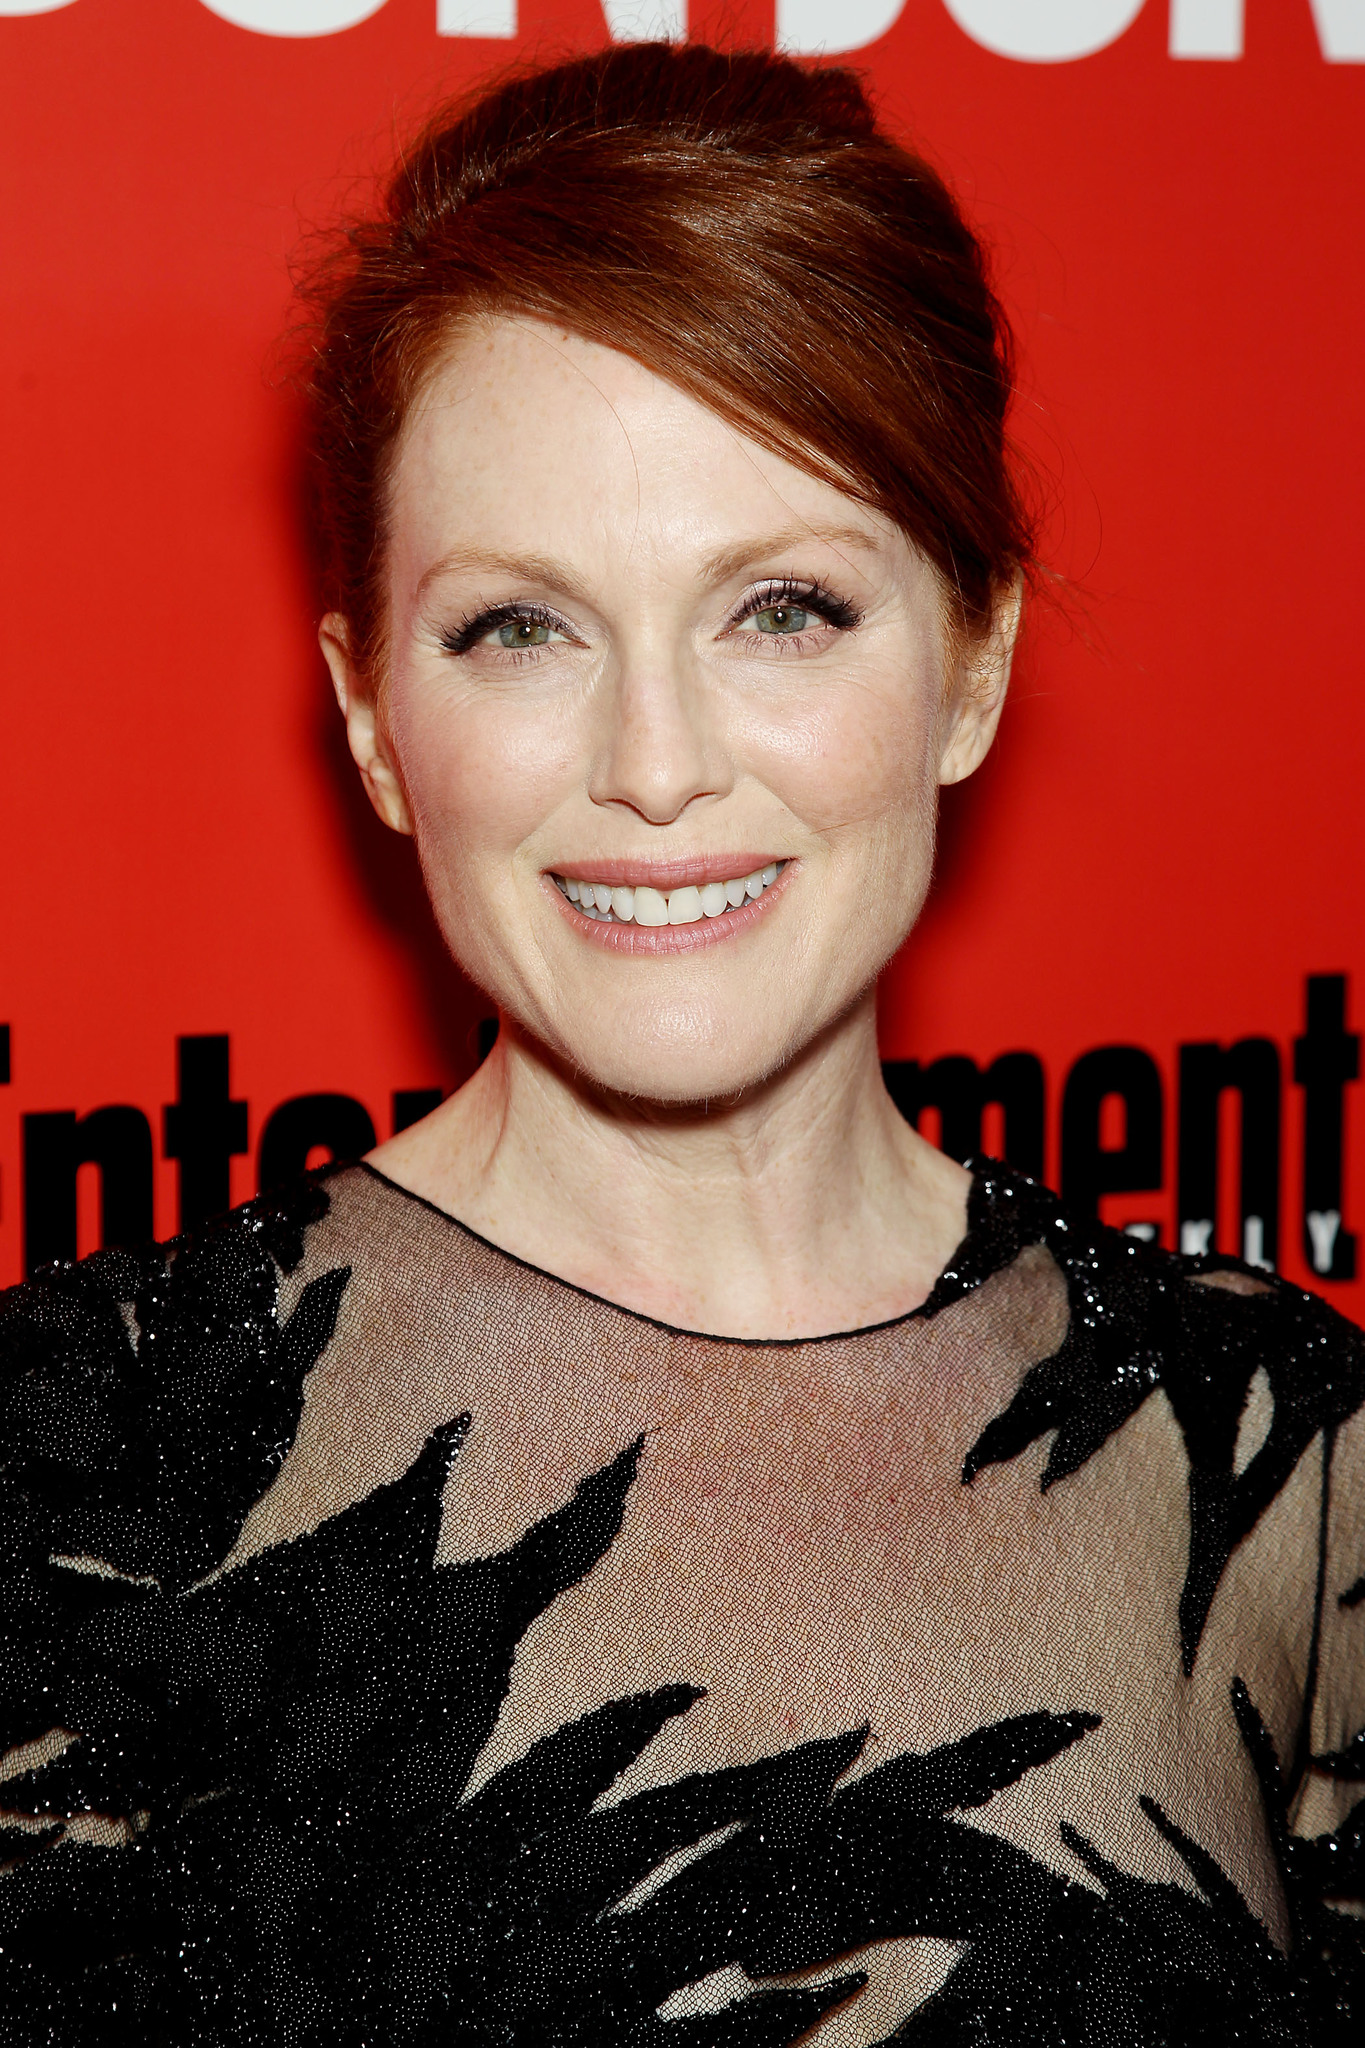 Julianne Moore at event of Don Zuanas (2013)